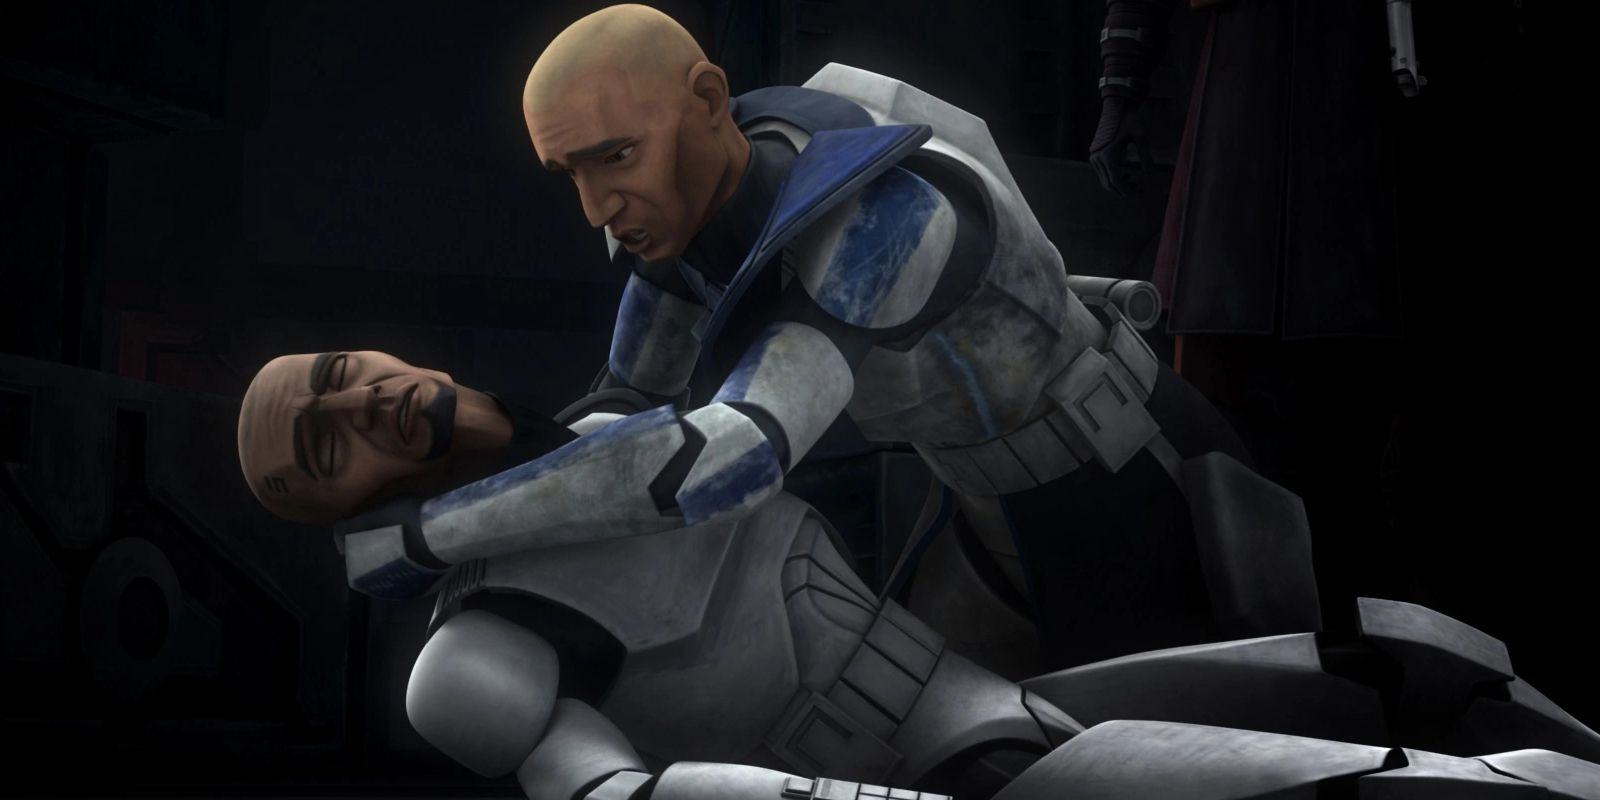 Fives dies in front of Rex in the Clone Wars